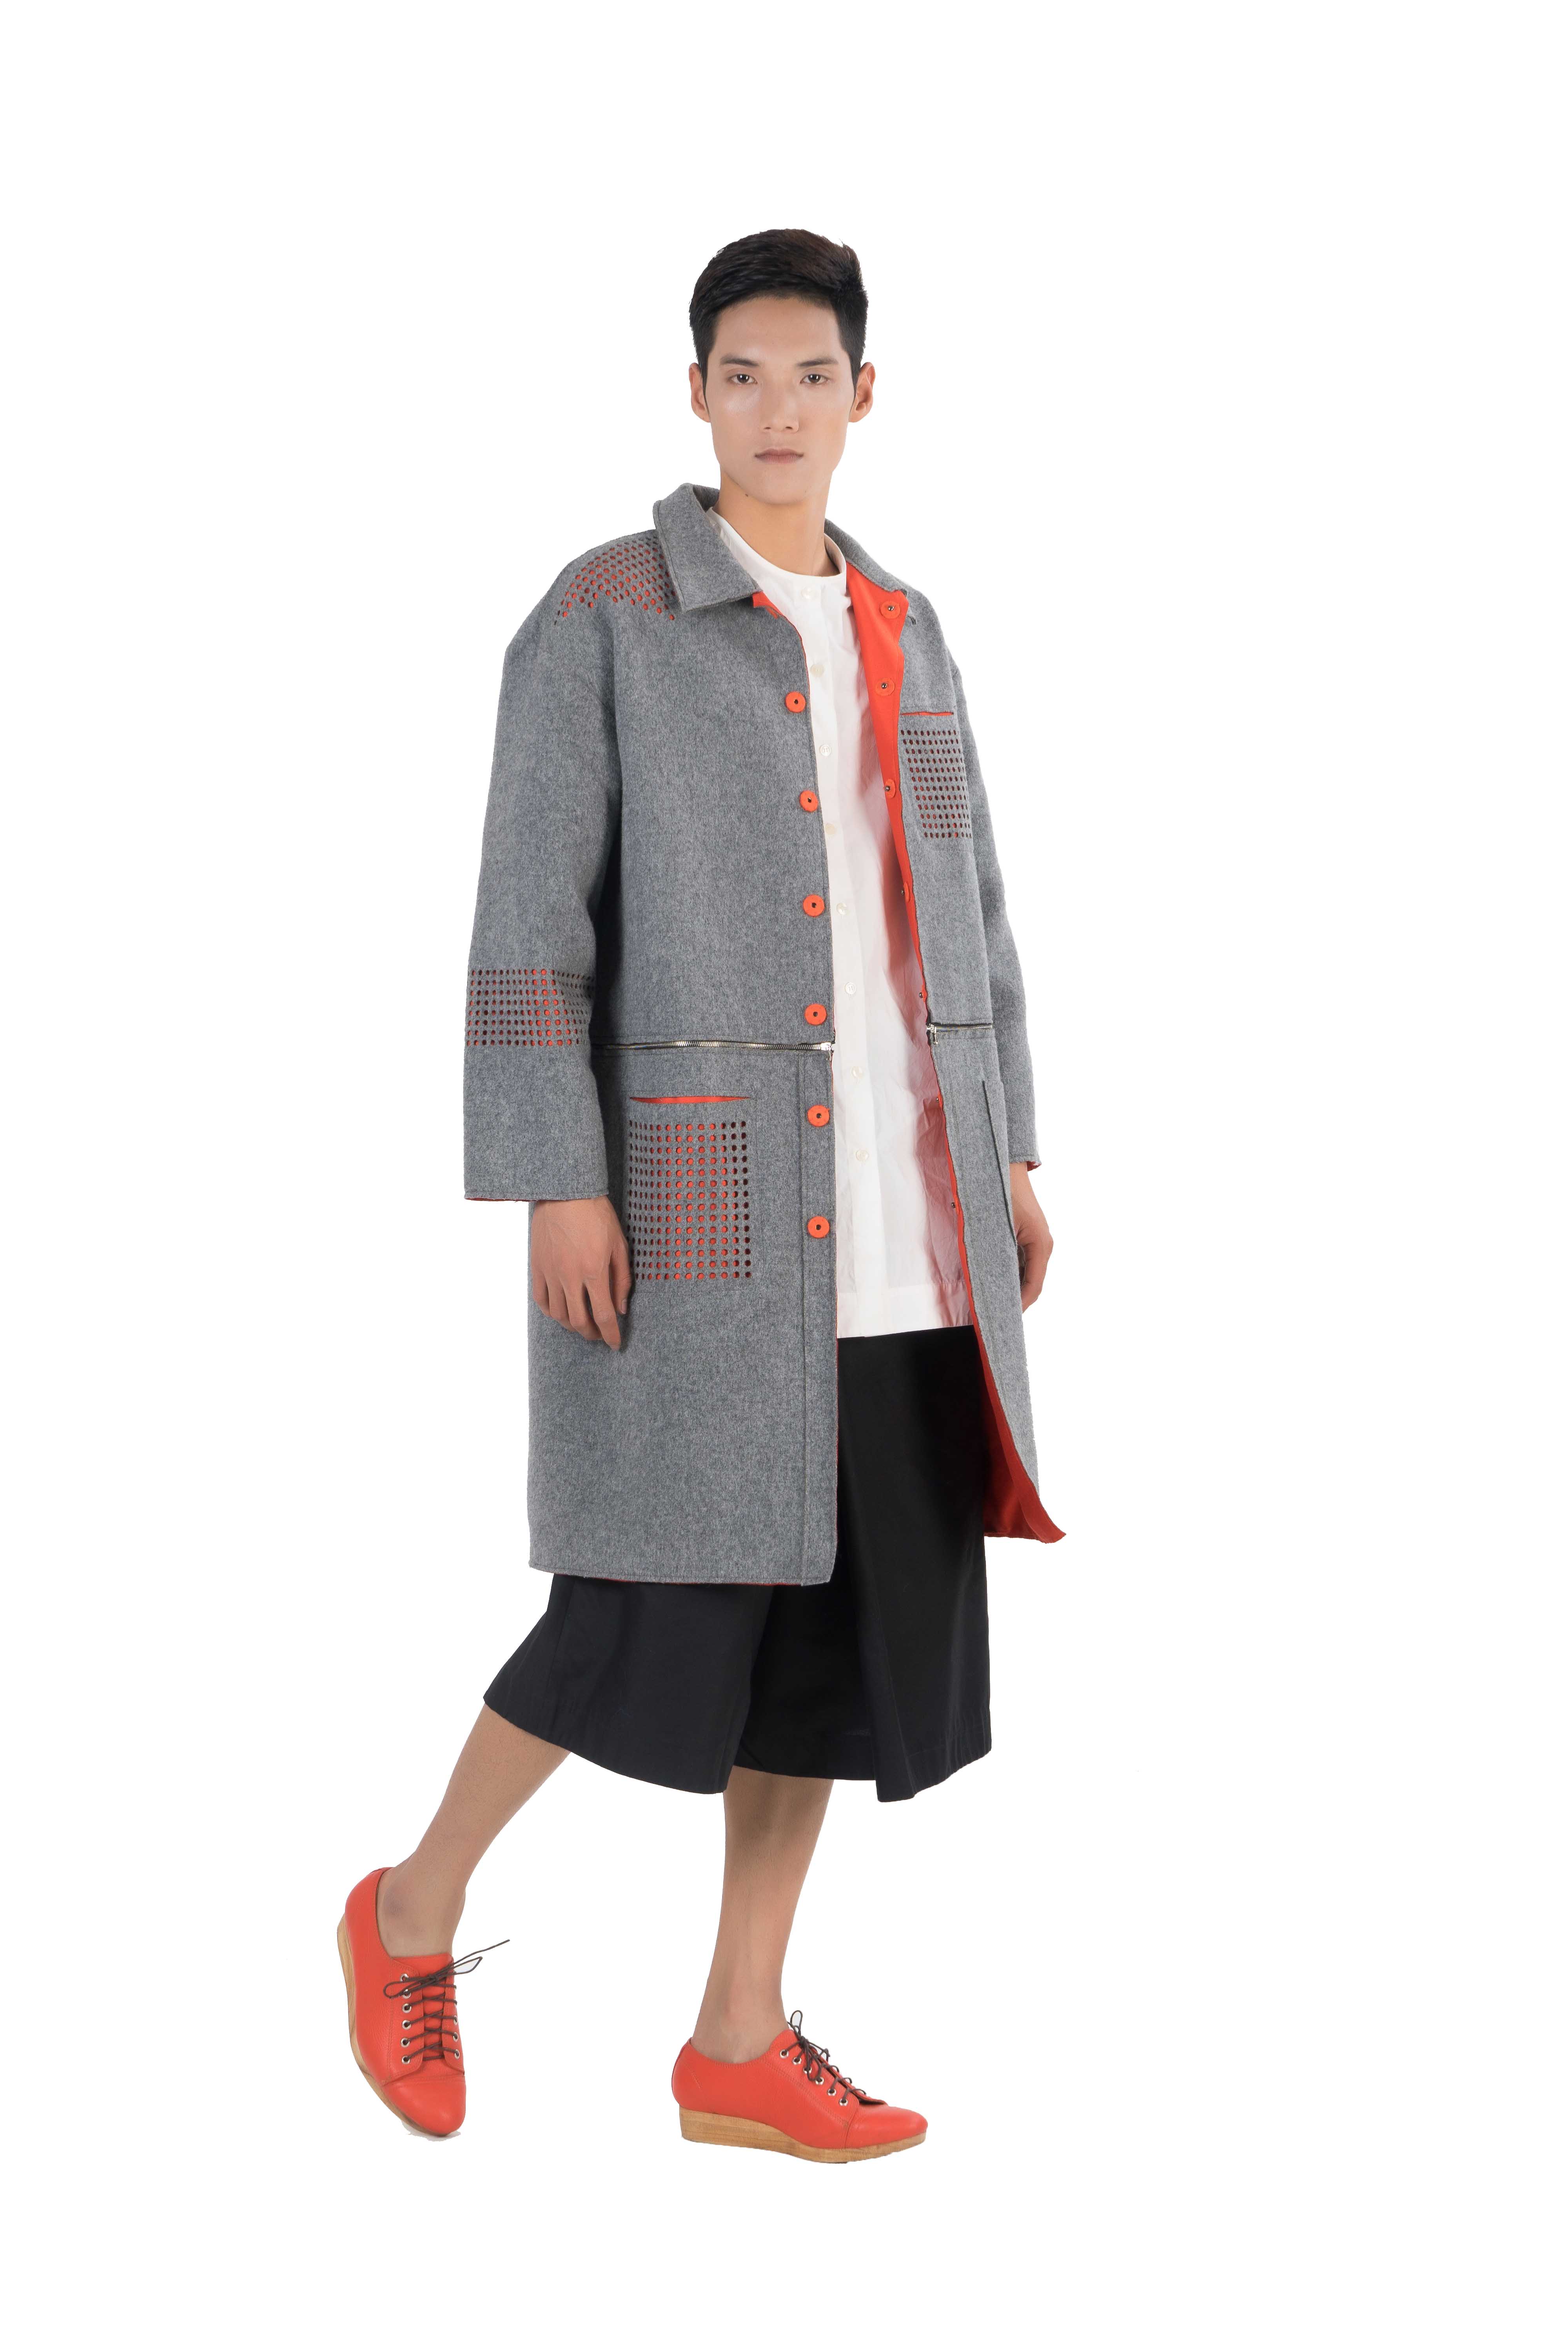 Grey wool blend coat with contrasting orange taffeta lining and see through laser cut detailing